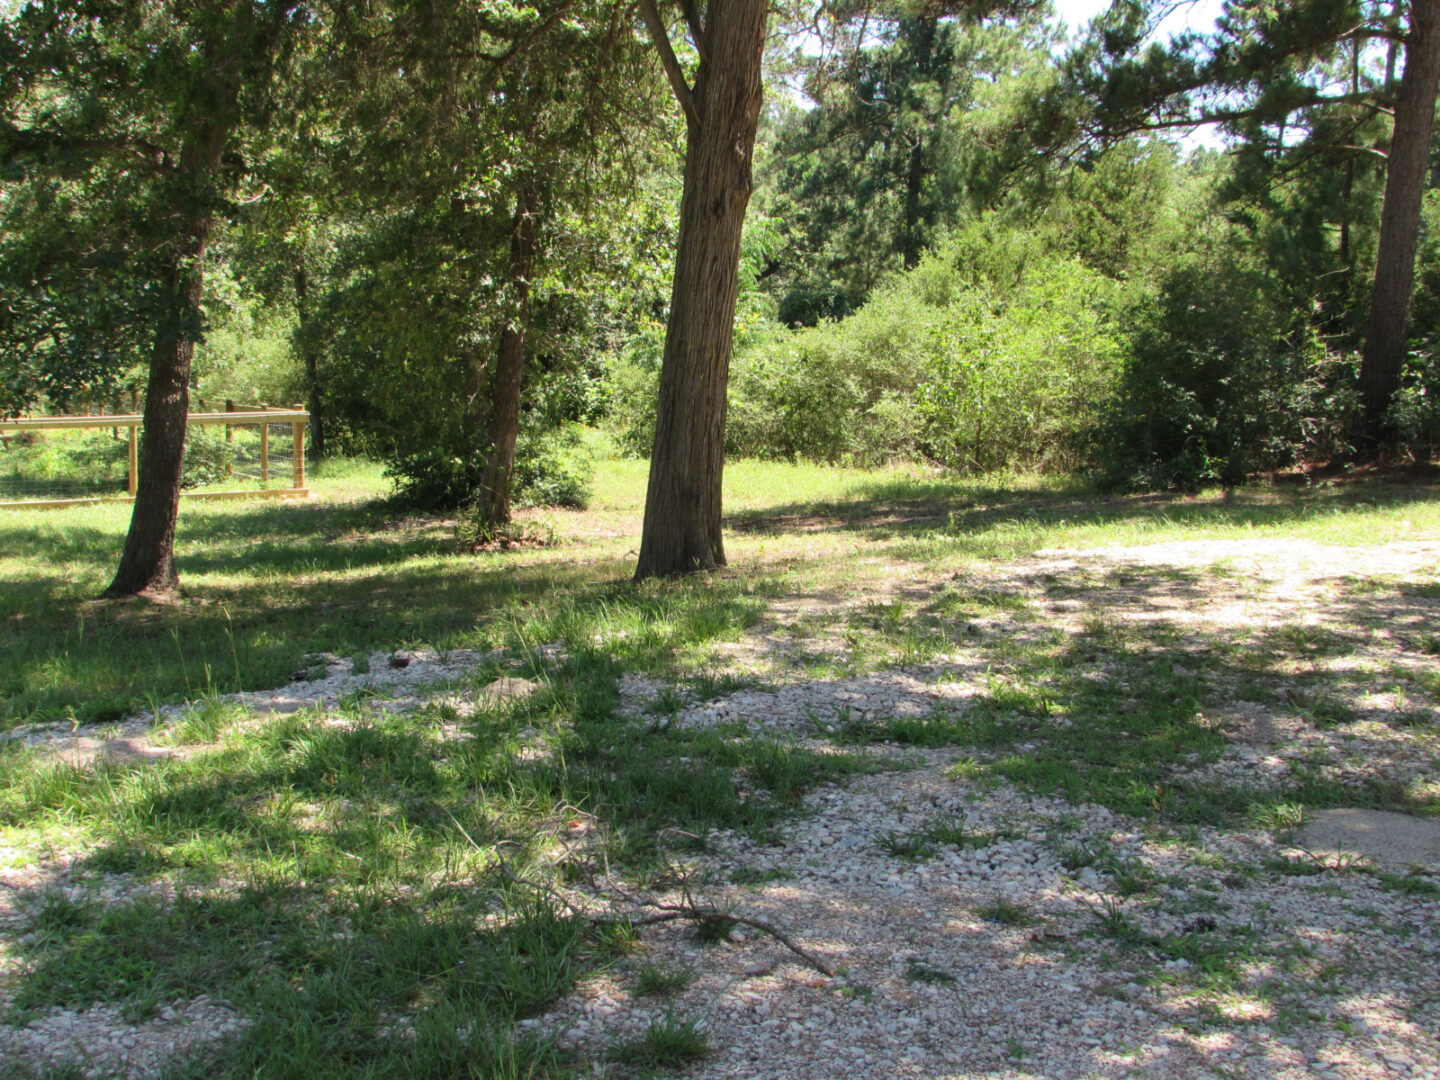 A grass field with gravel and trees